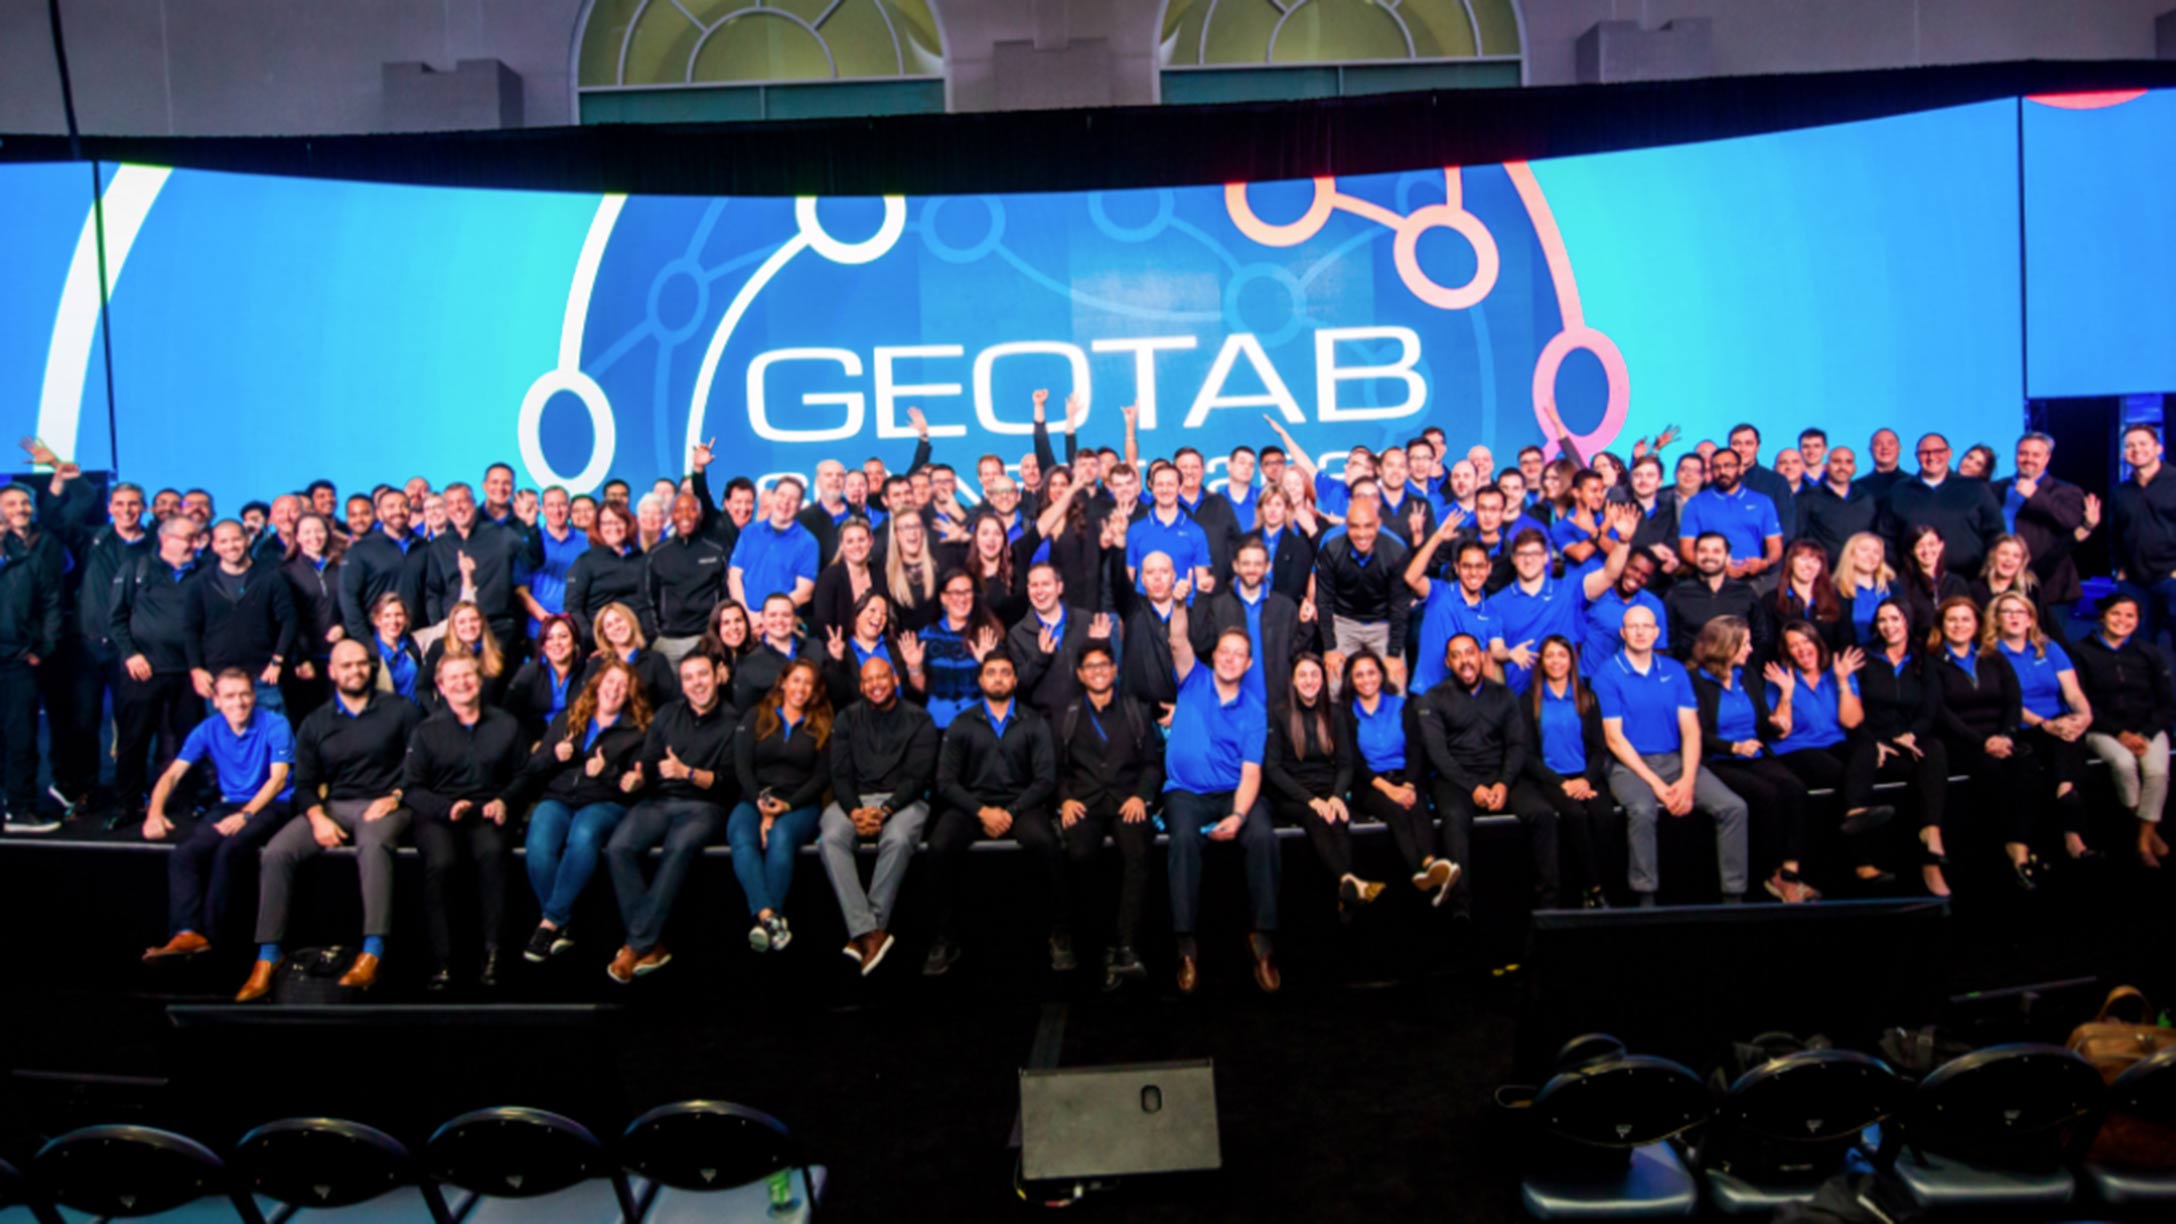 The Geotab team at an event